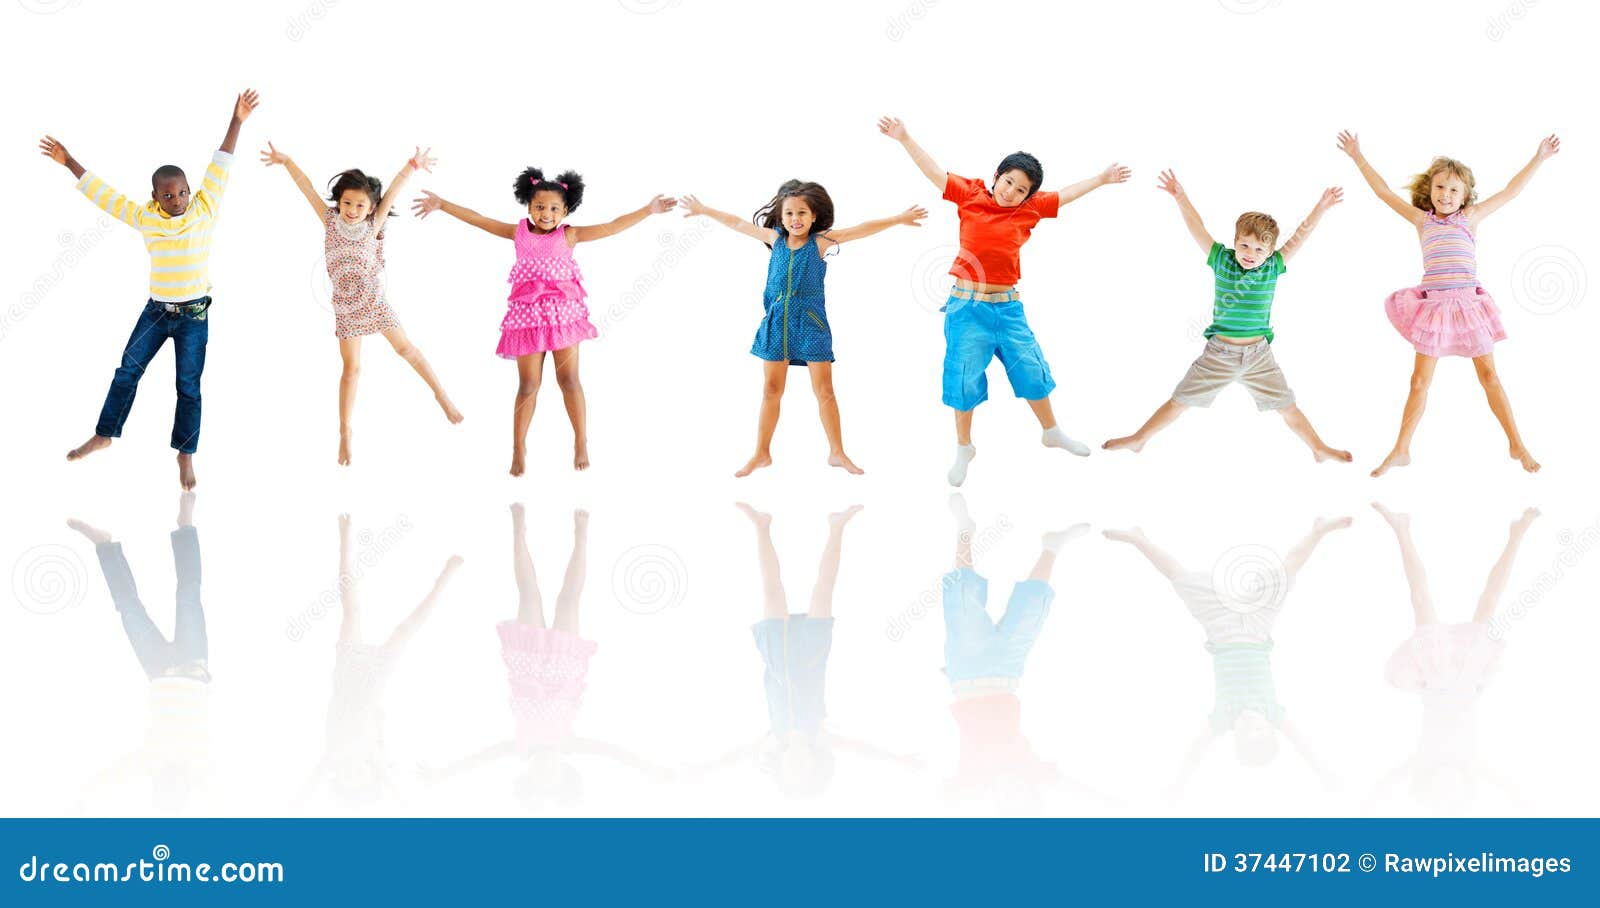 group of diverse children jumping